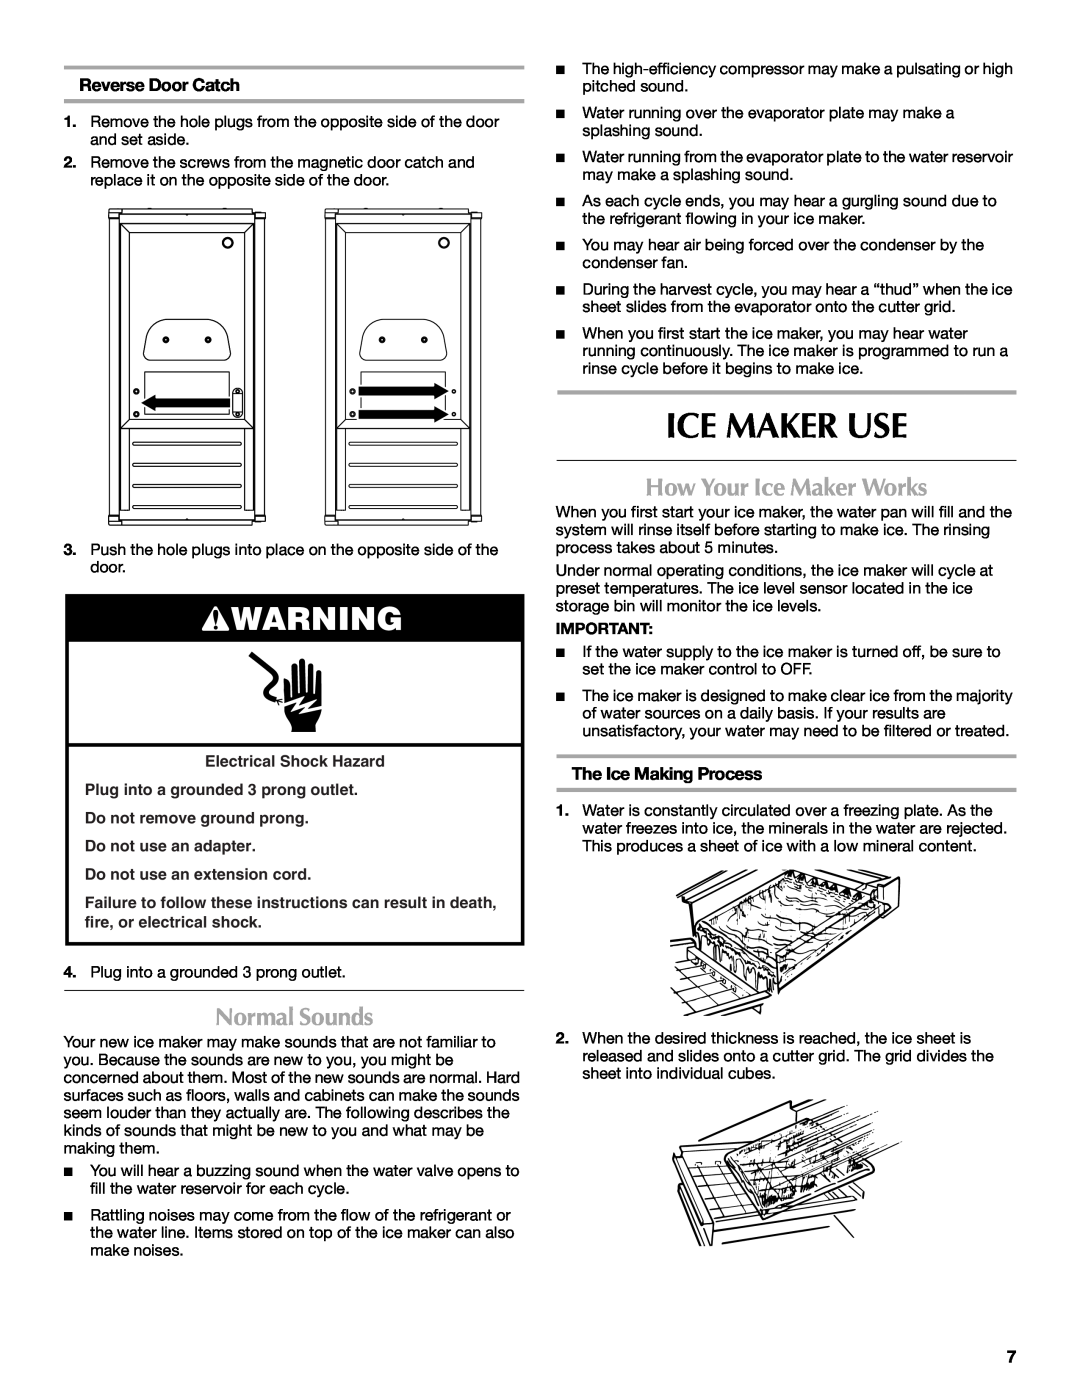 Maytag W10206488A Ice Maker Use, Normal Sounds, How Your Ice Maker Works, Reverse Door Catch, The Ice Making Process 